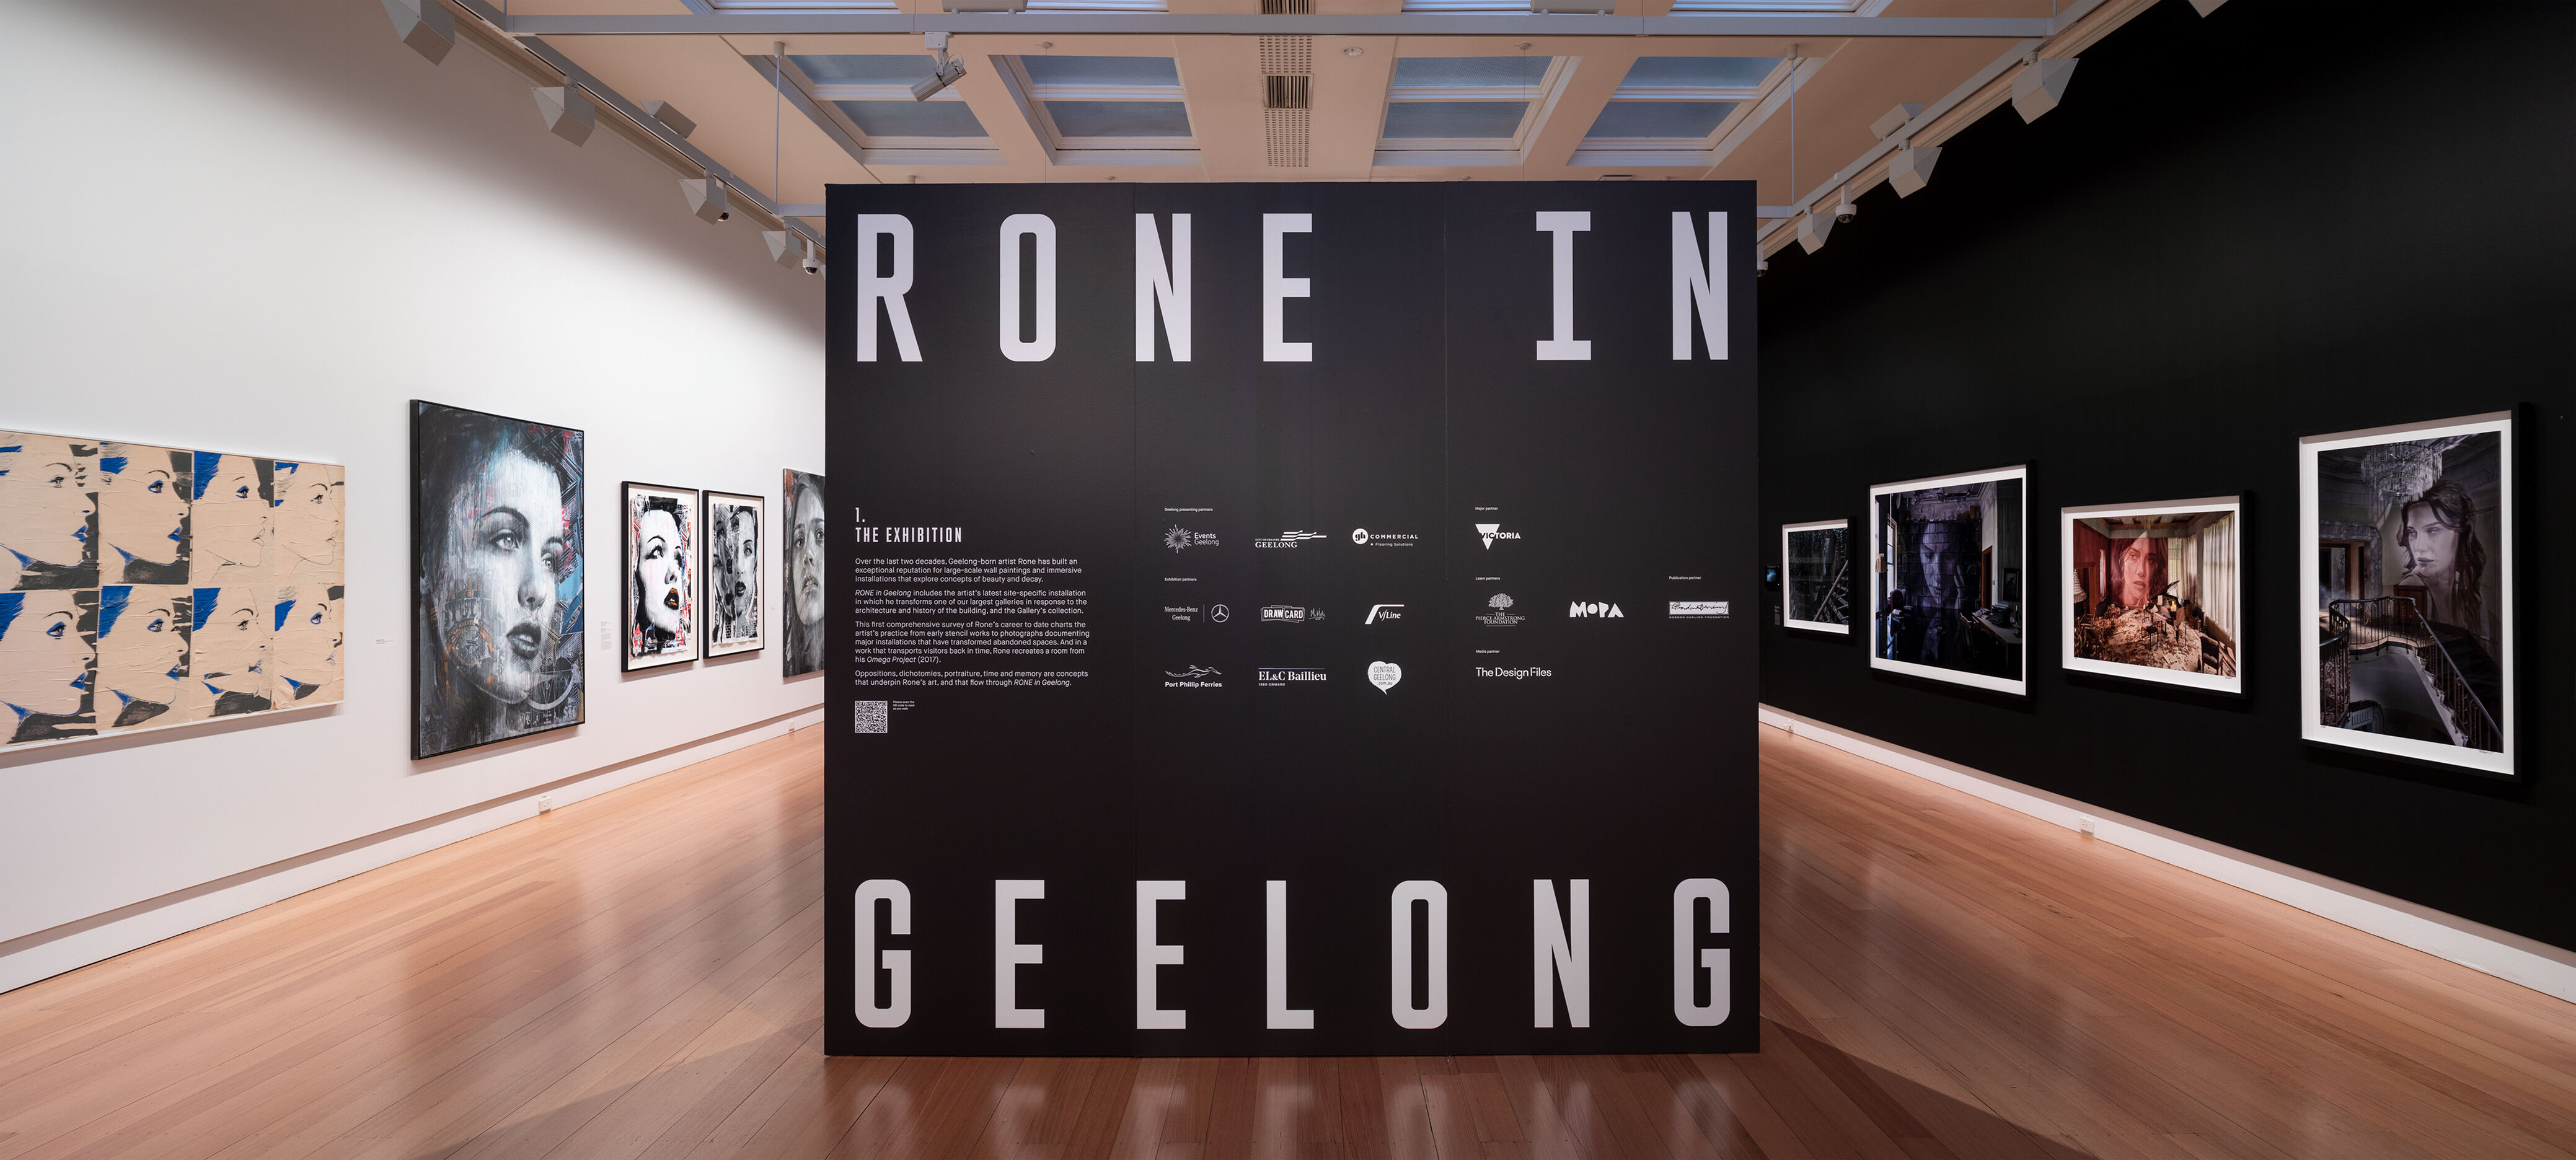 Rone in Geelong_installation image_Photographer Andrew Curtis-05